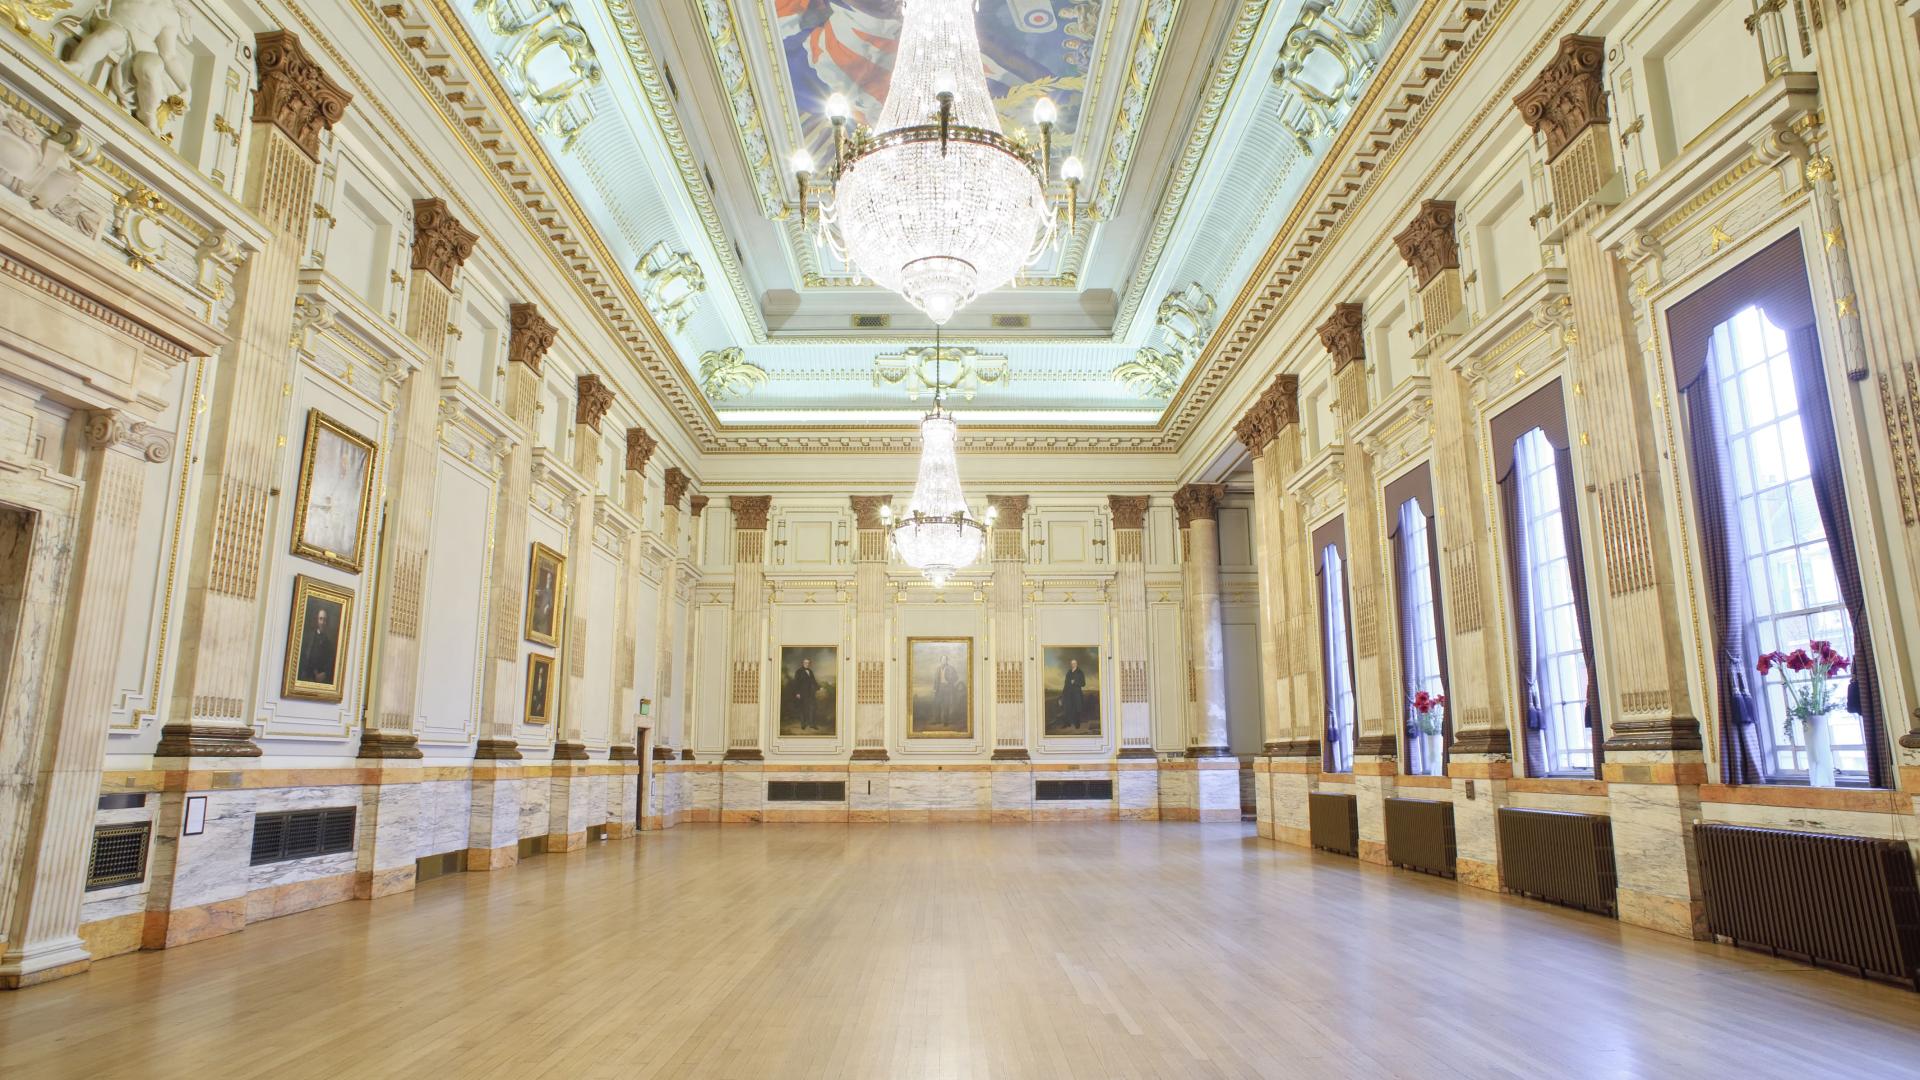 Ball Venues for Hire in London